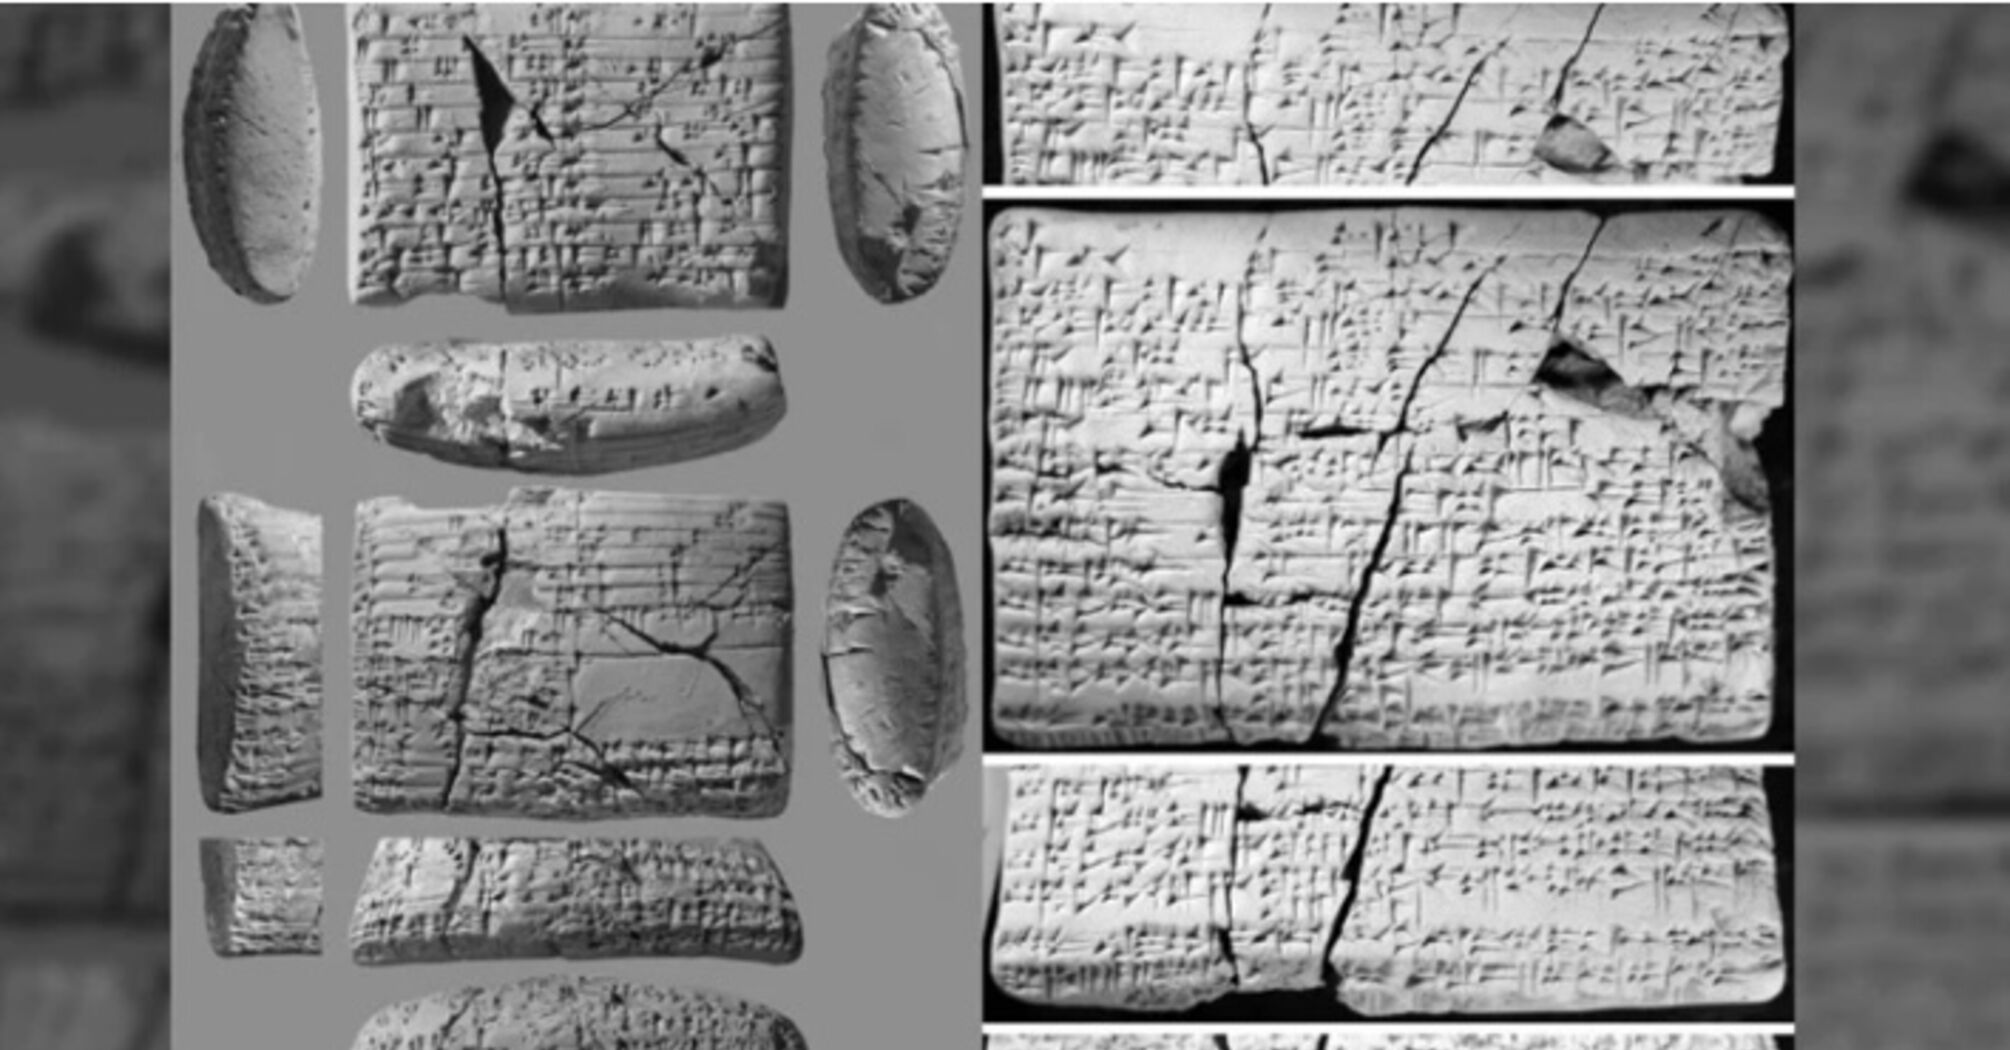 Scientists find tablets in Iraq written in ancient Bailon language, which was considered lost 